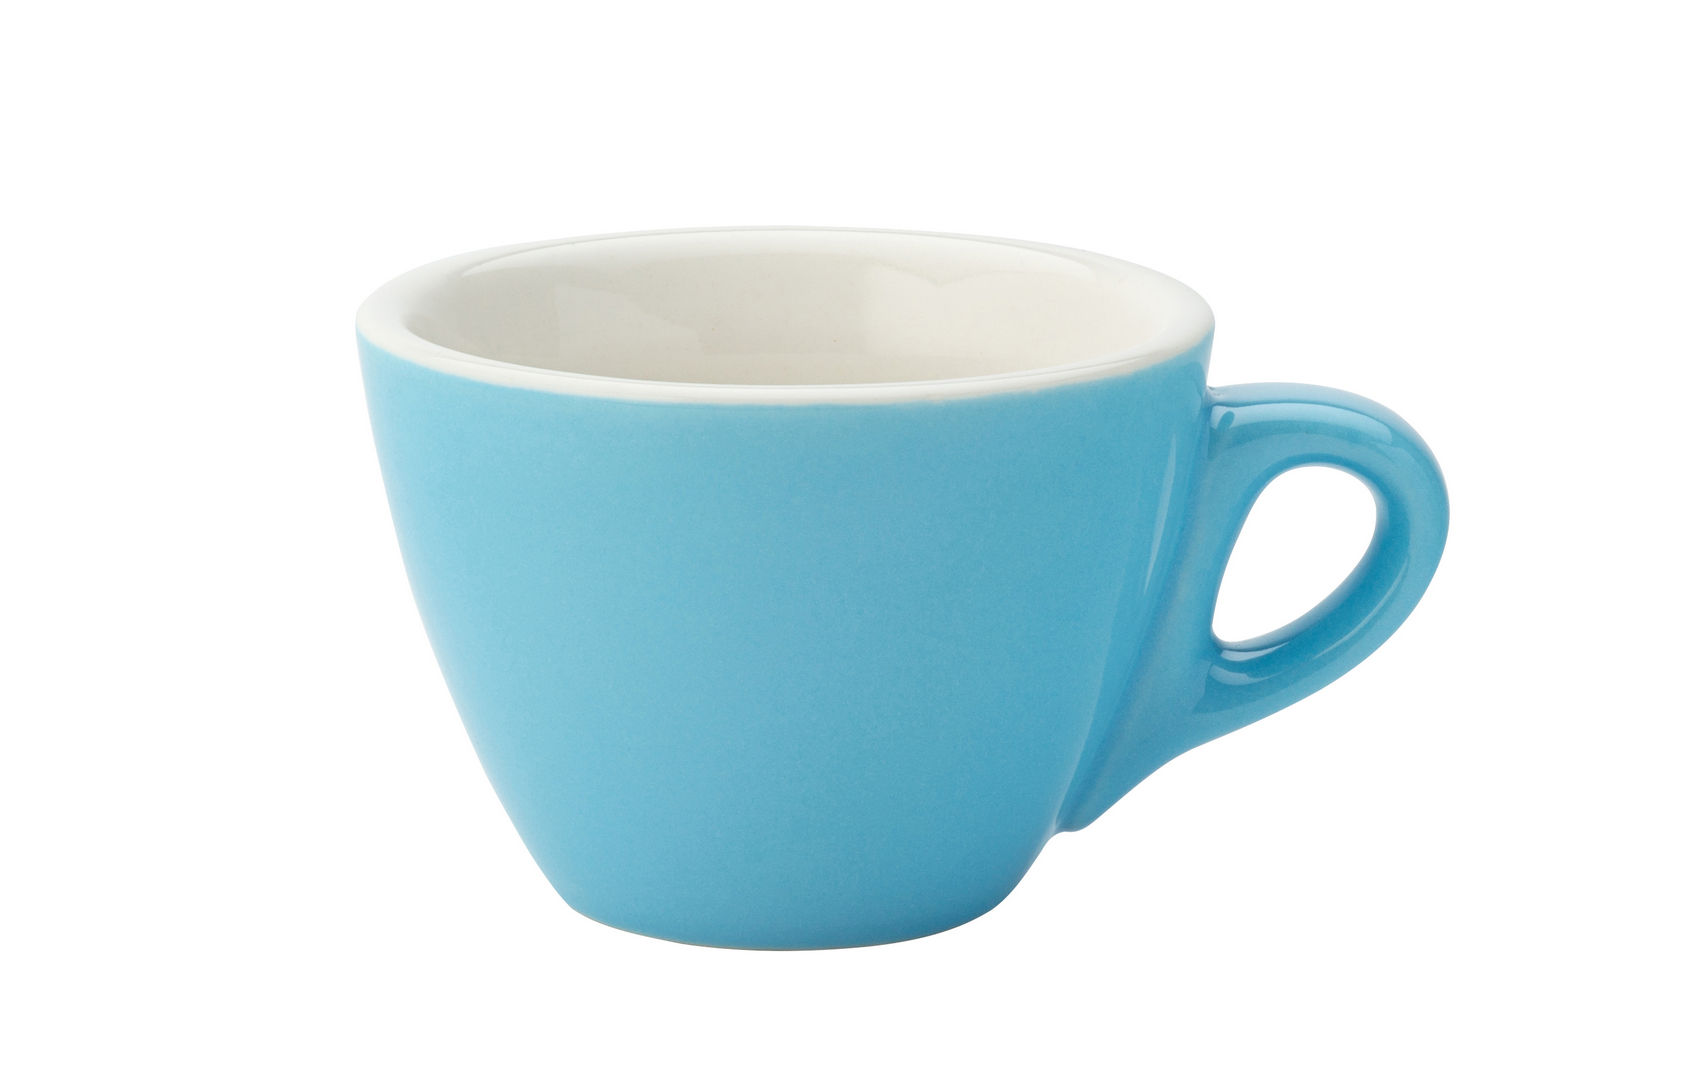 Barista Flat White Blue Cup 5.5oz (16cl) - CT8098-000000-B01012 (Pack of 12)